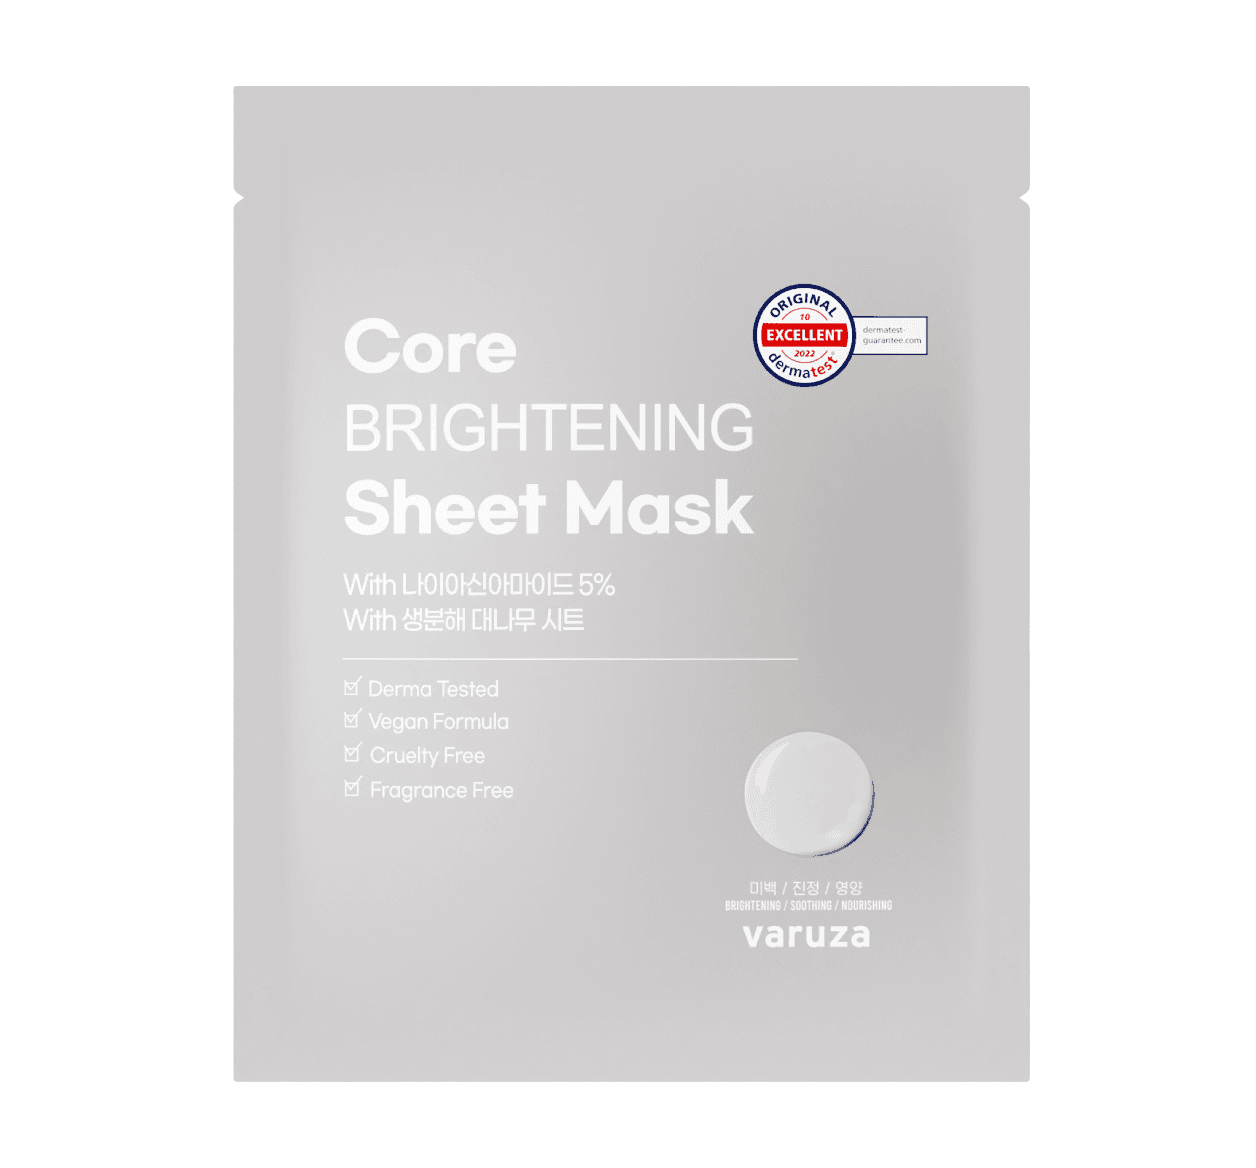 Core Brightening Sheet Mask with Niacinamide 5%